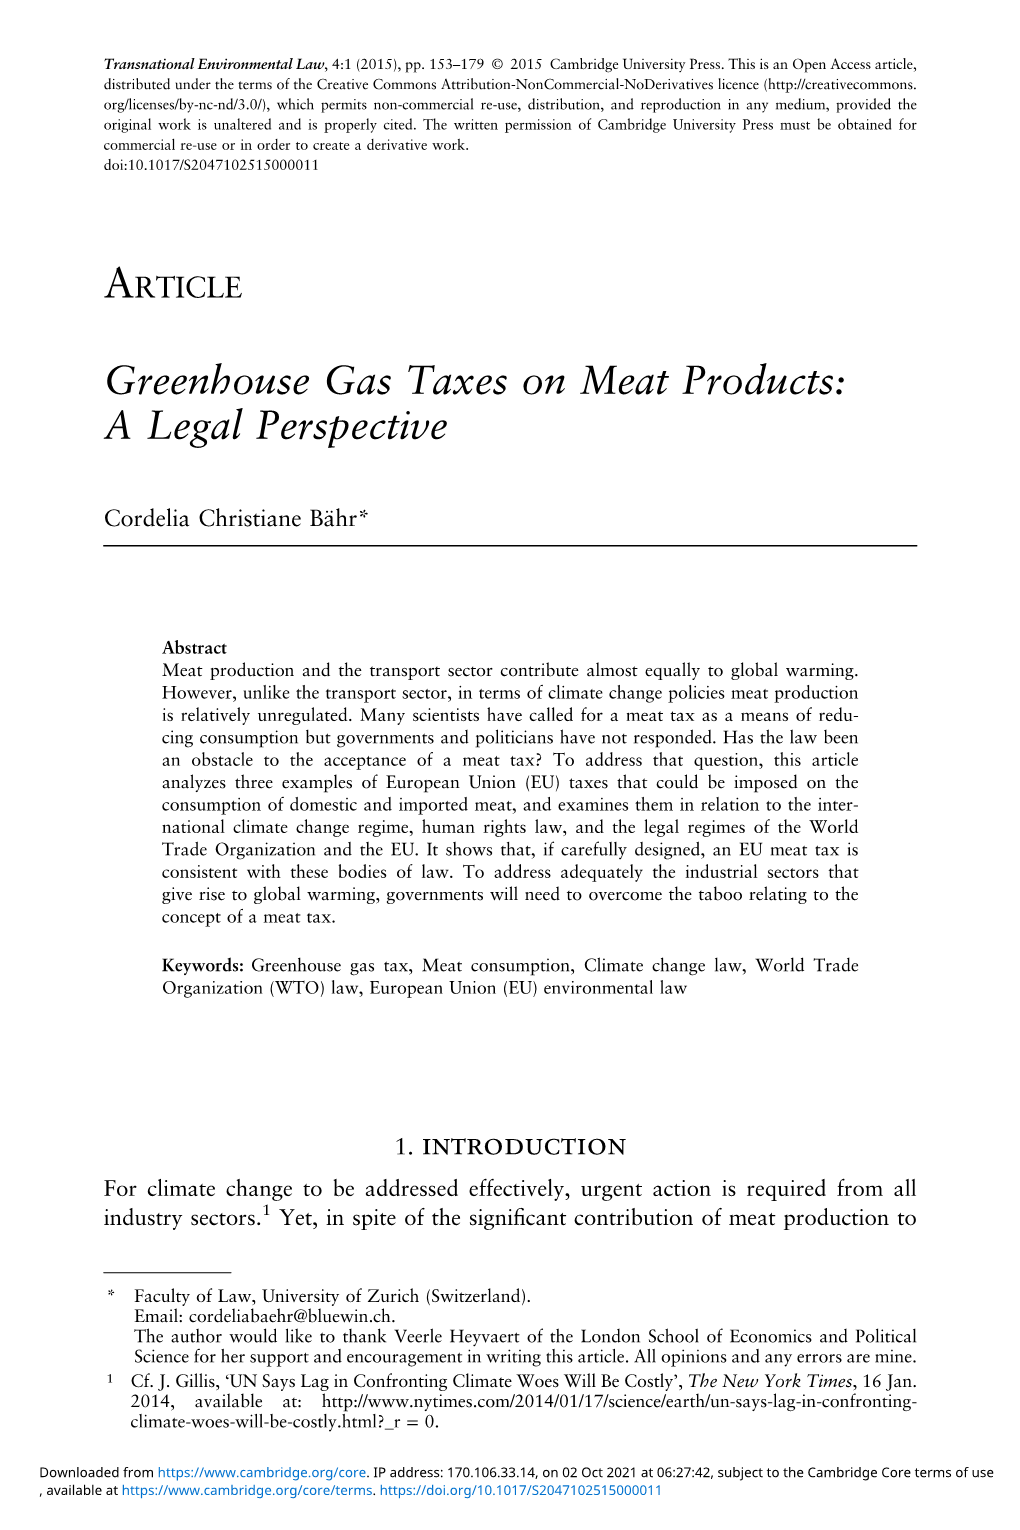 Greenhouse Gas Taxes on Meat Products: a Legal Perspective